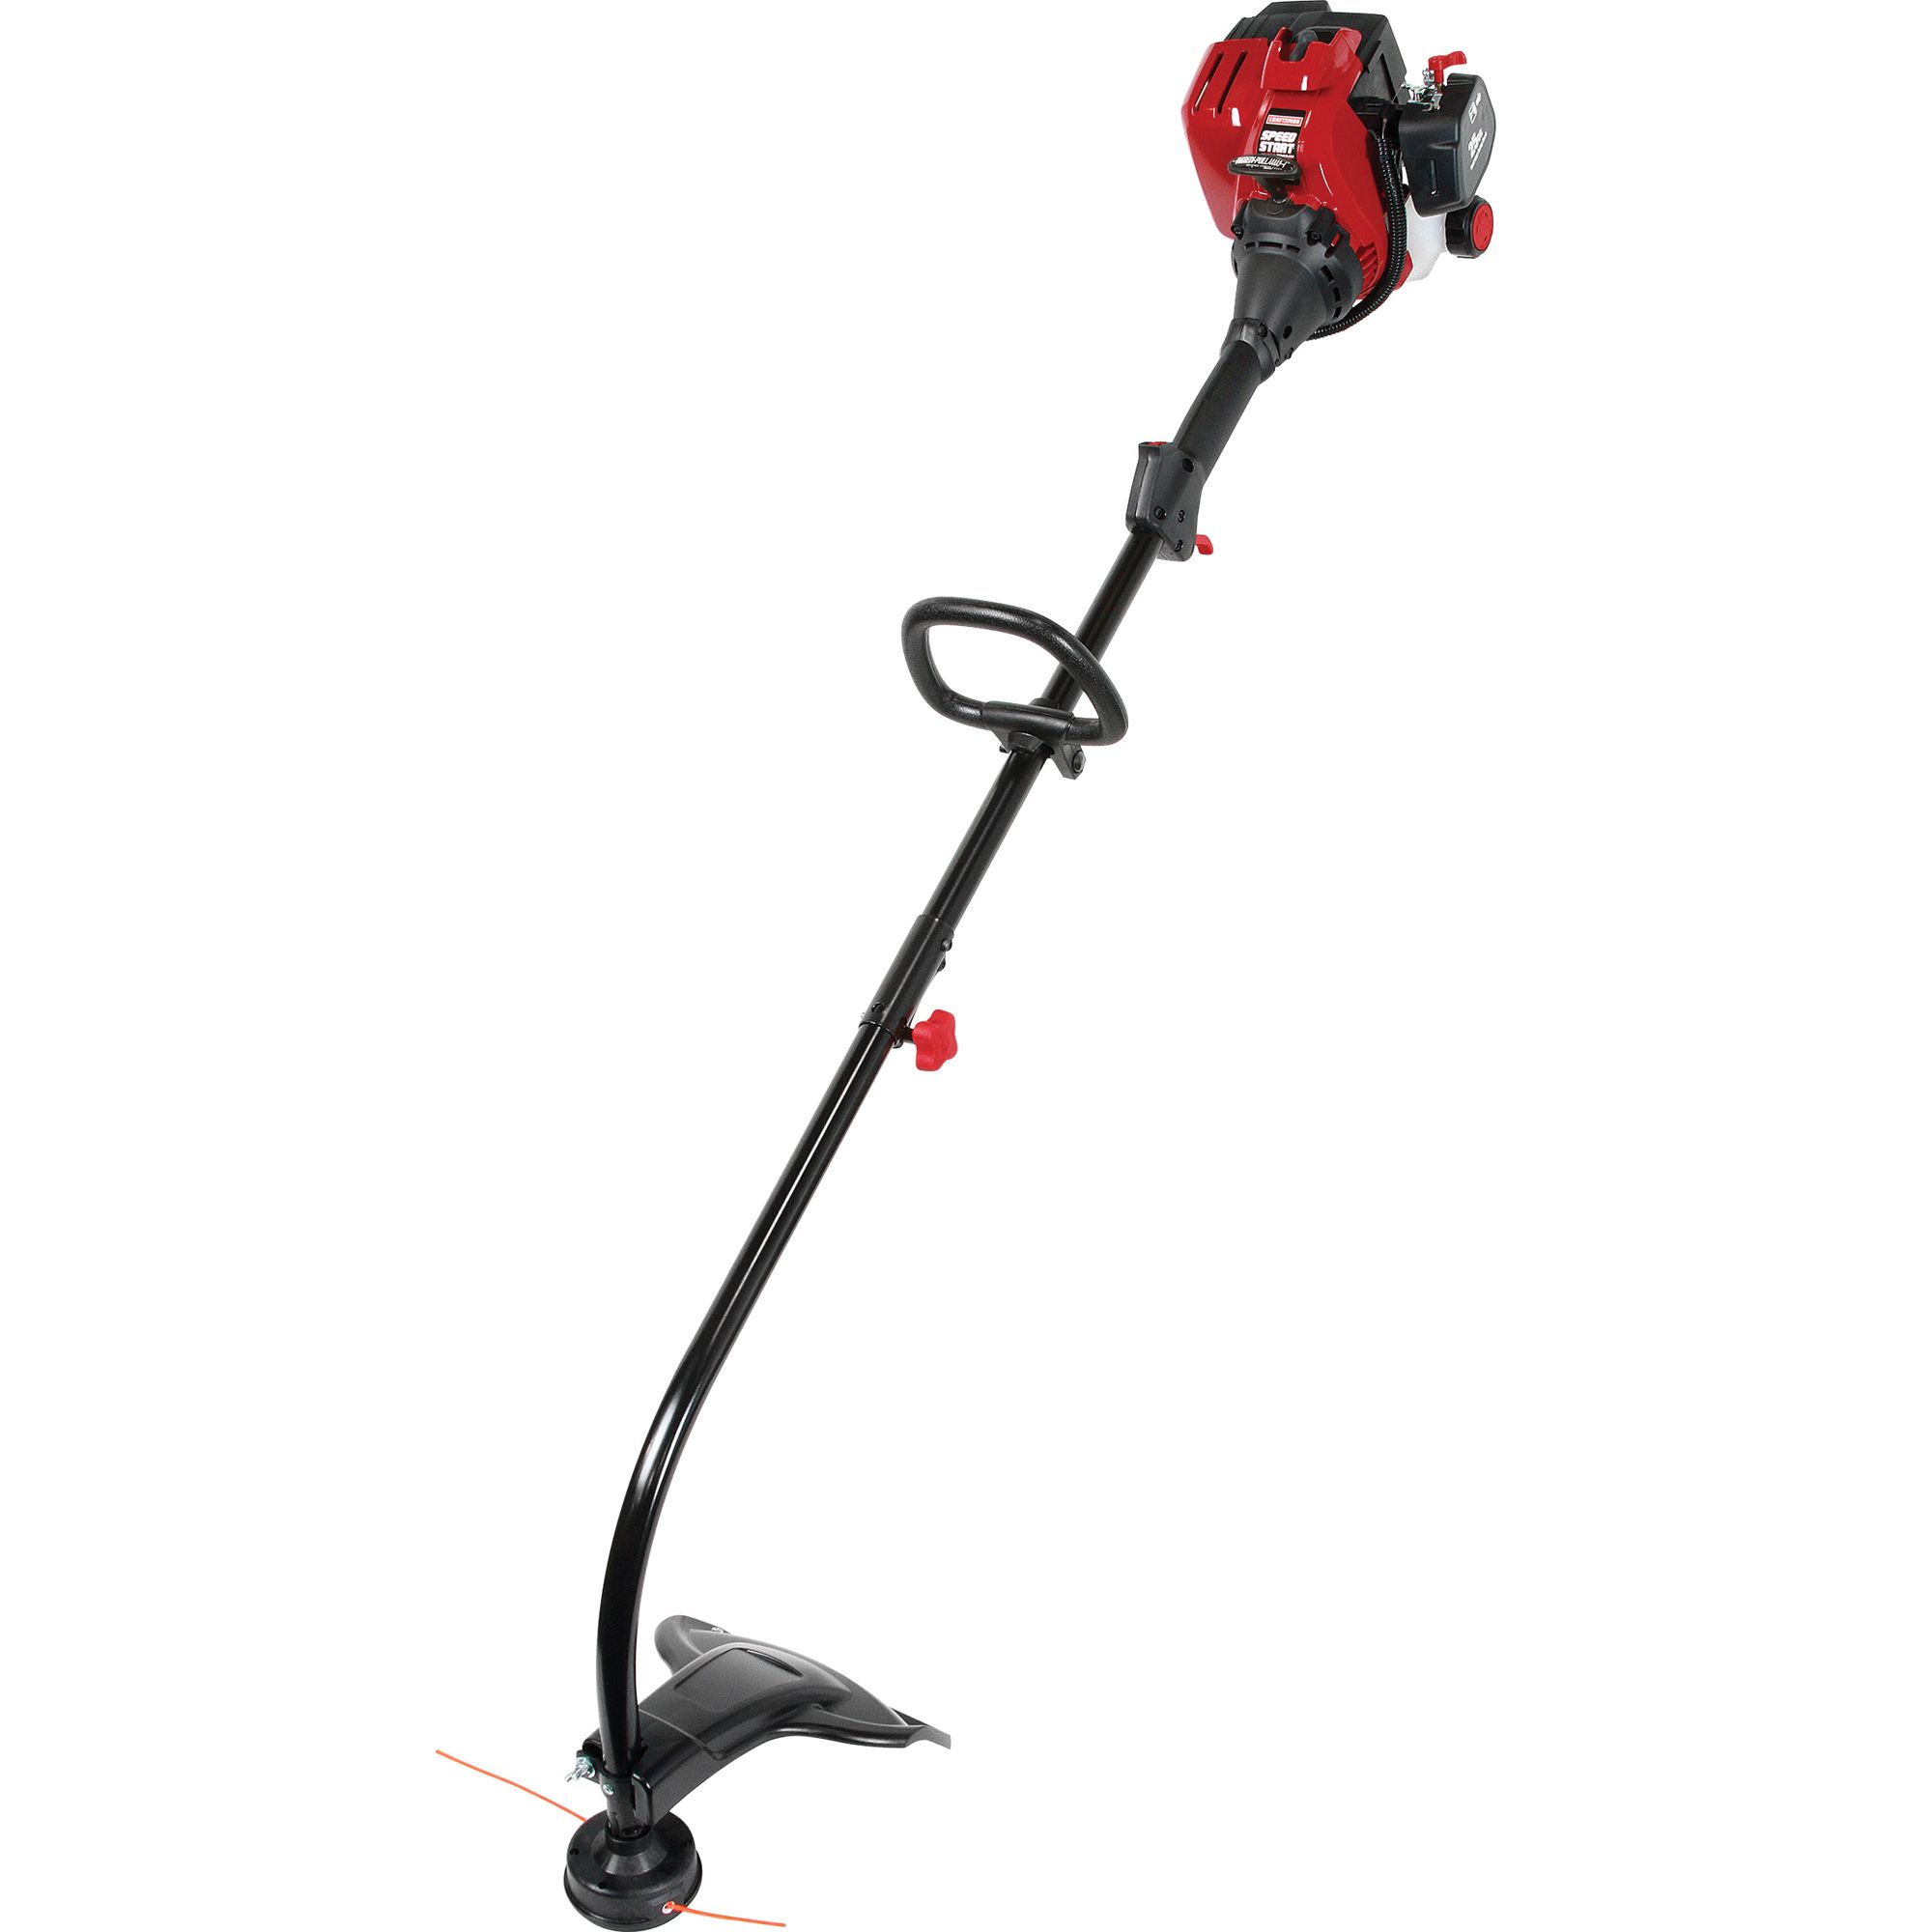 Craftsman Convertible™ 25 cc* 2-cycle curved shaft Weedwacker™ Gas